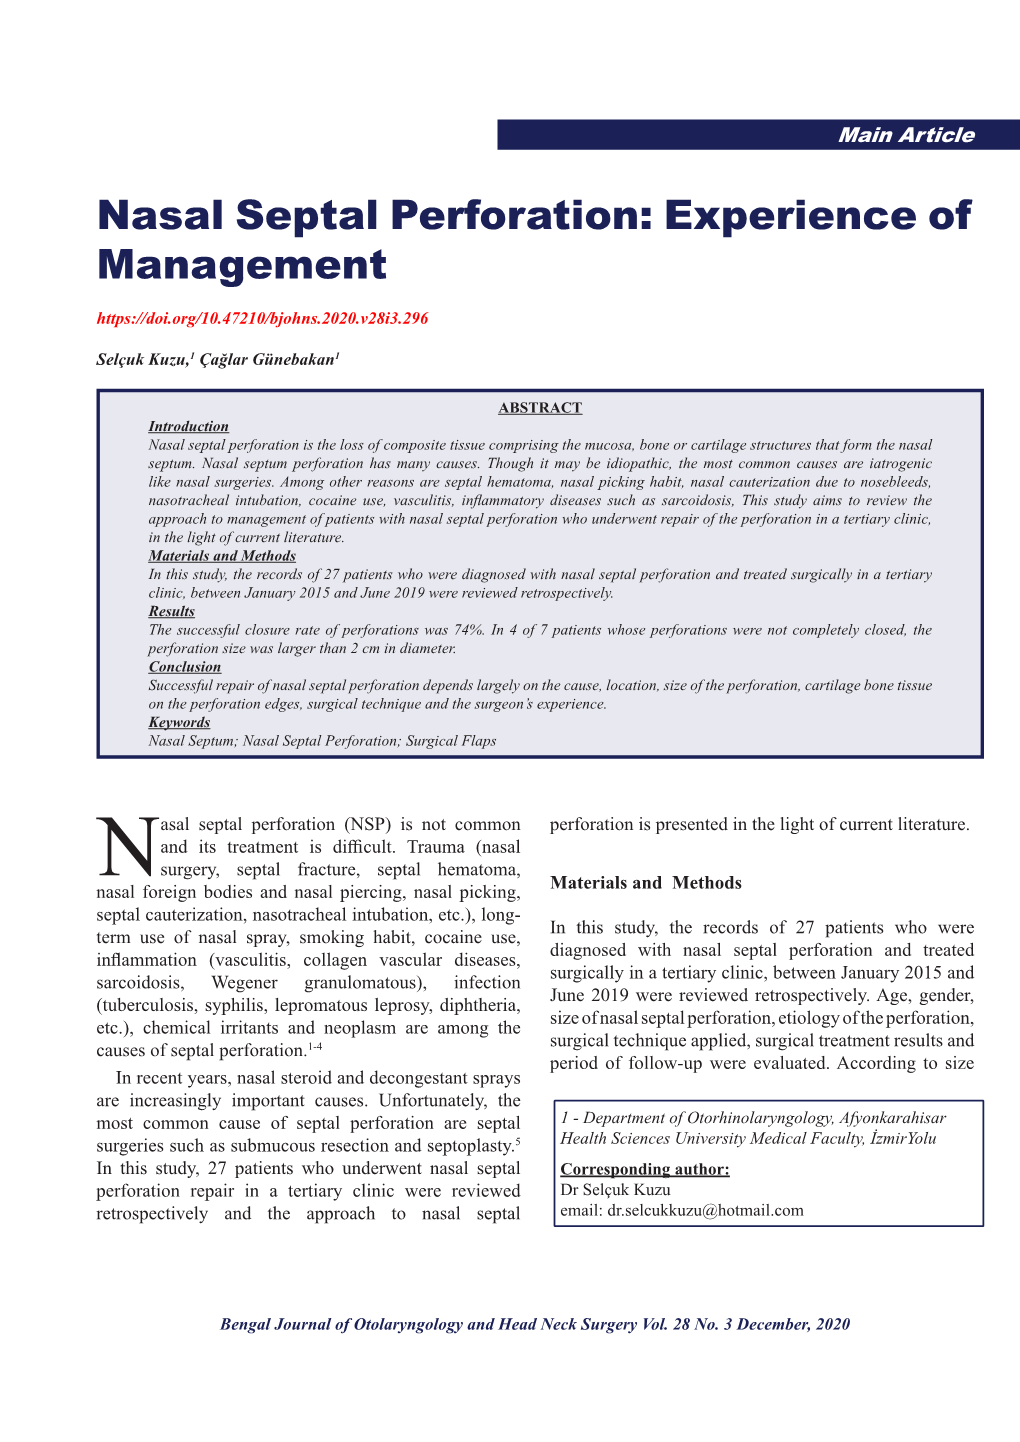 Nasal Septal Perforation: Experience of Management